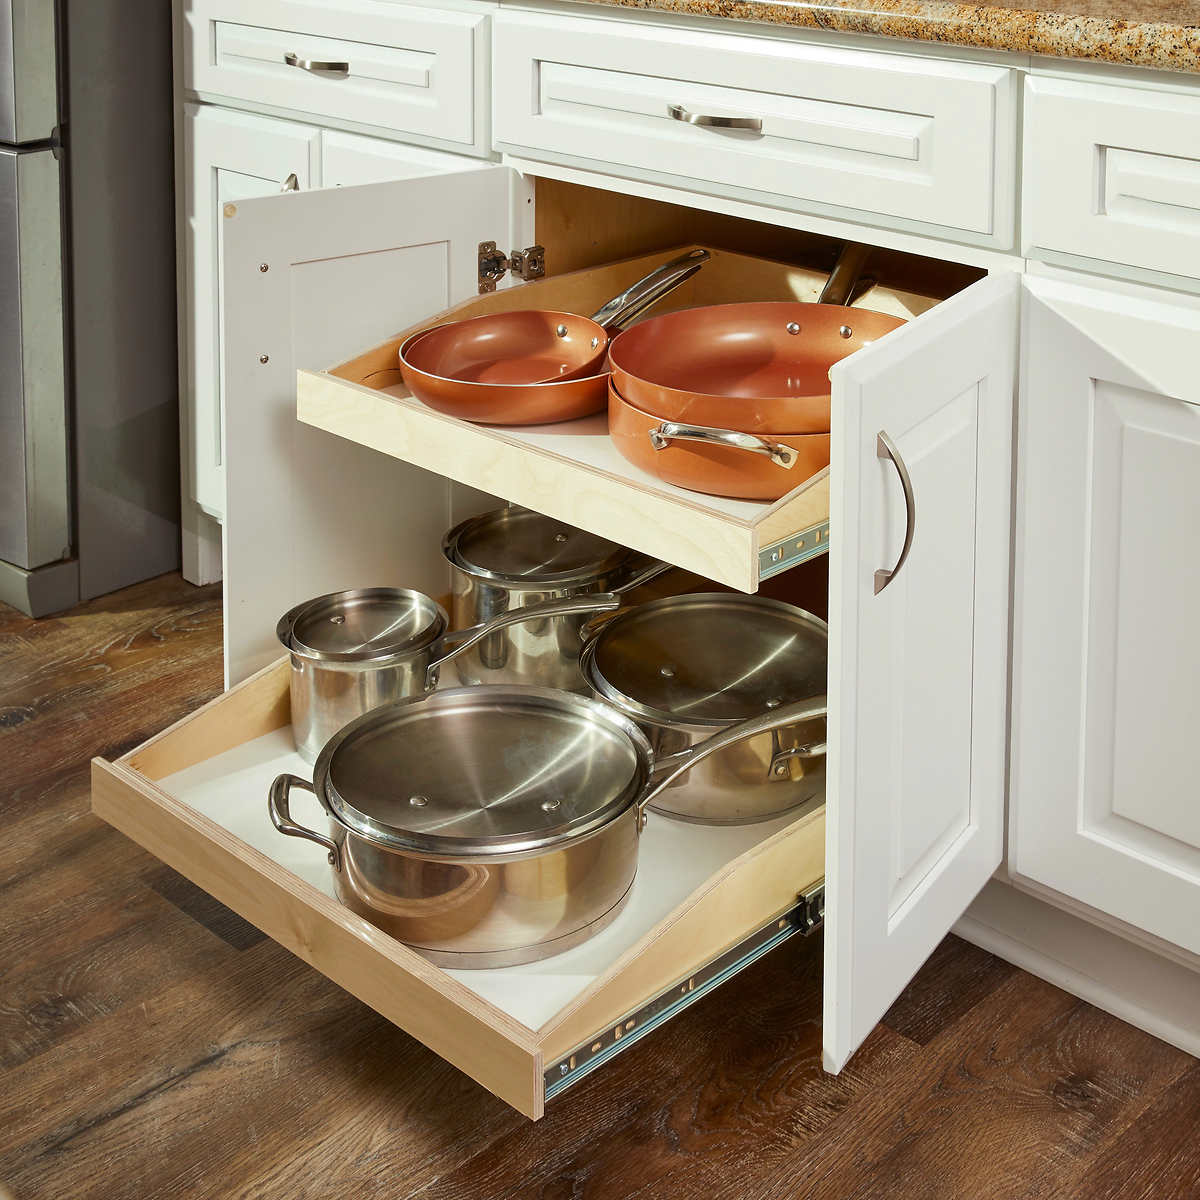 Install Pullout Shelves In A Narrow Area Underneath The Countertop